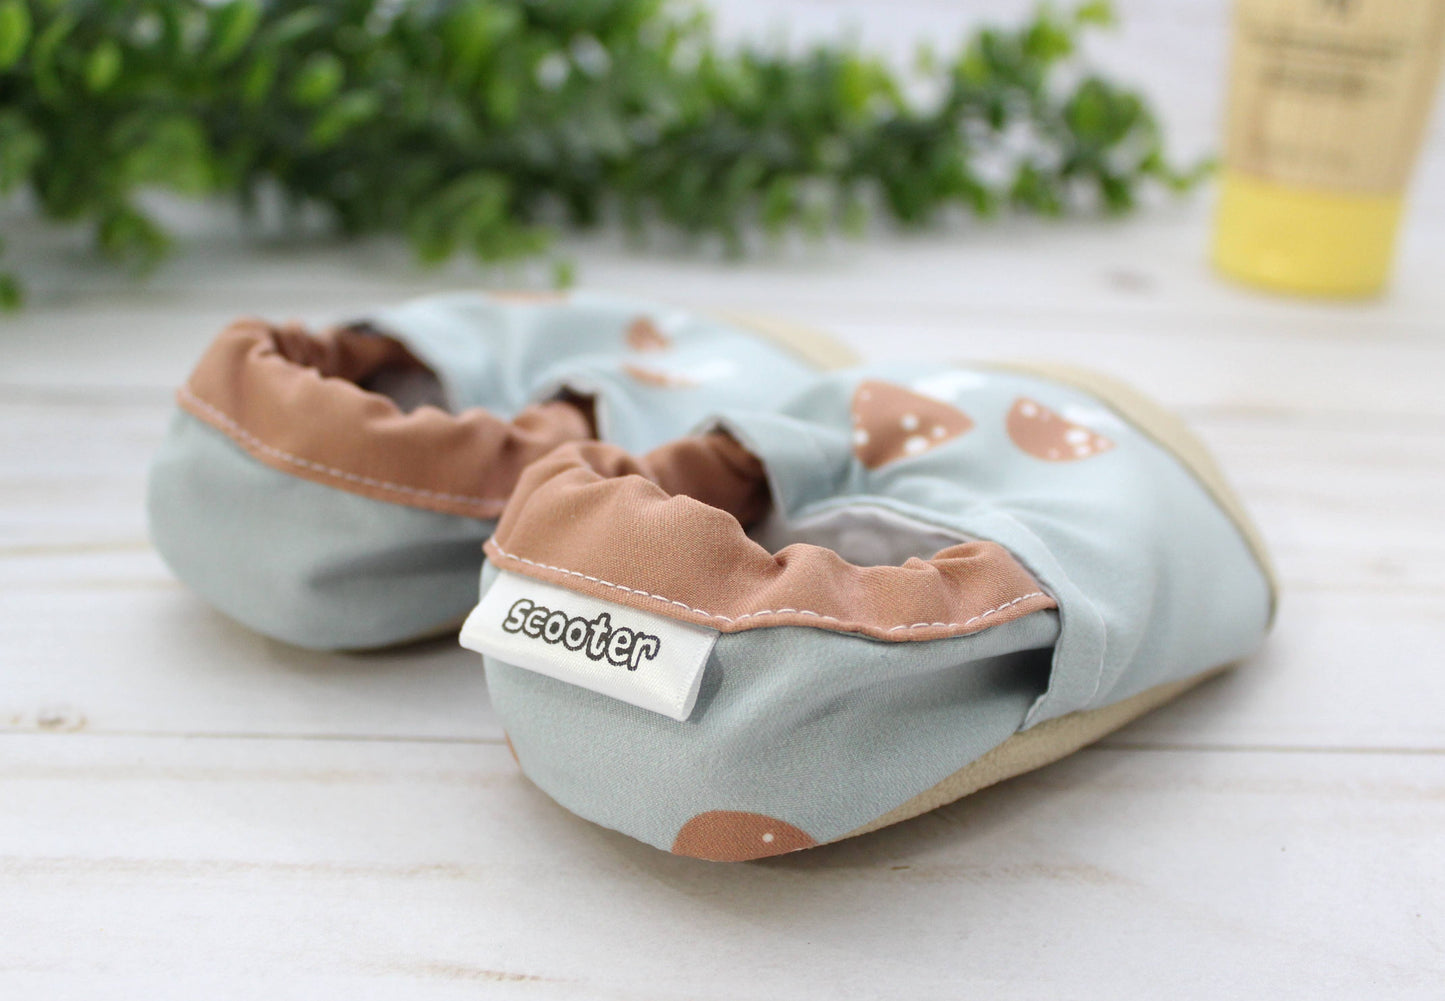 Scooter Booties - Mushroom Baby Water Shoes